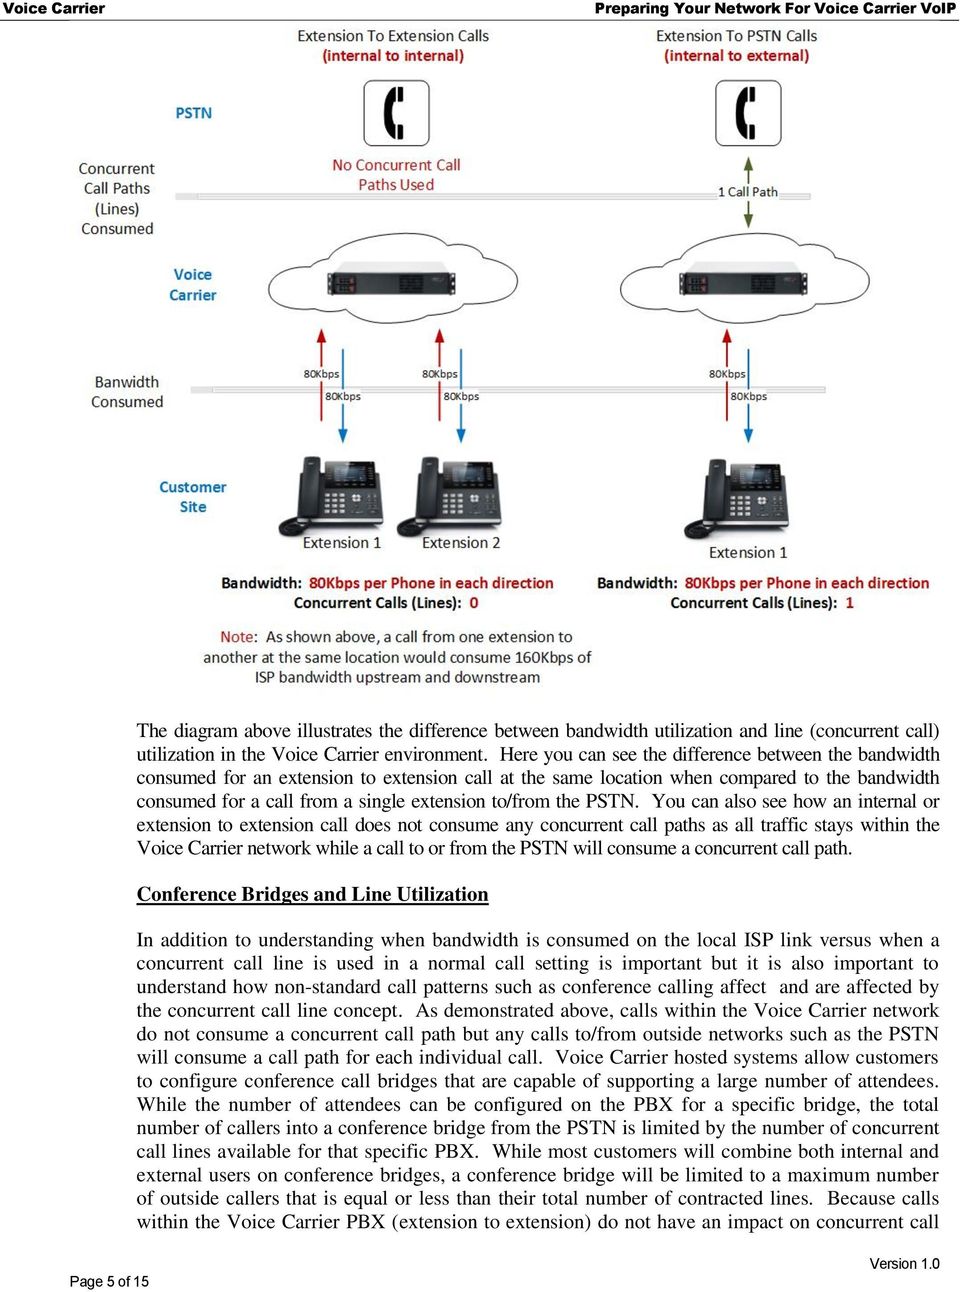 Yu can als see hw an internal r extensin t extensin call des nt cnsume any cncurrent call paths as all traffic stays within the Vice Carrier netwrk while a call t r frm the PSTN will cnsume a